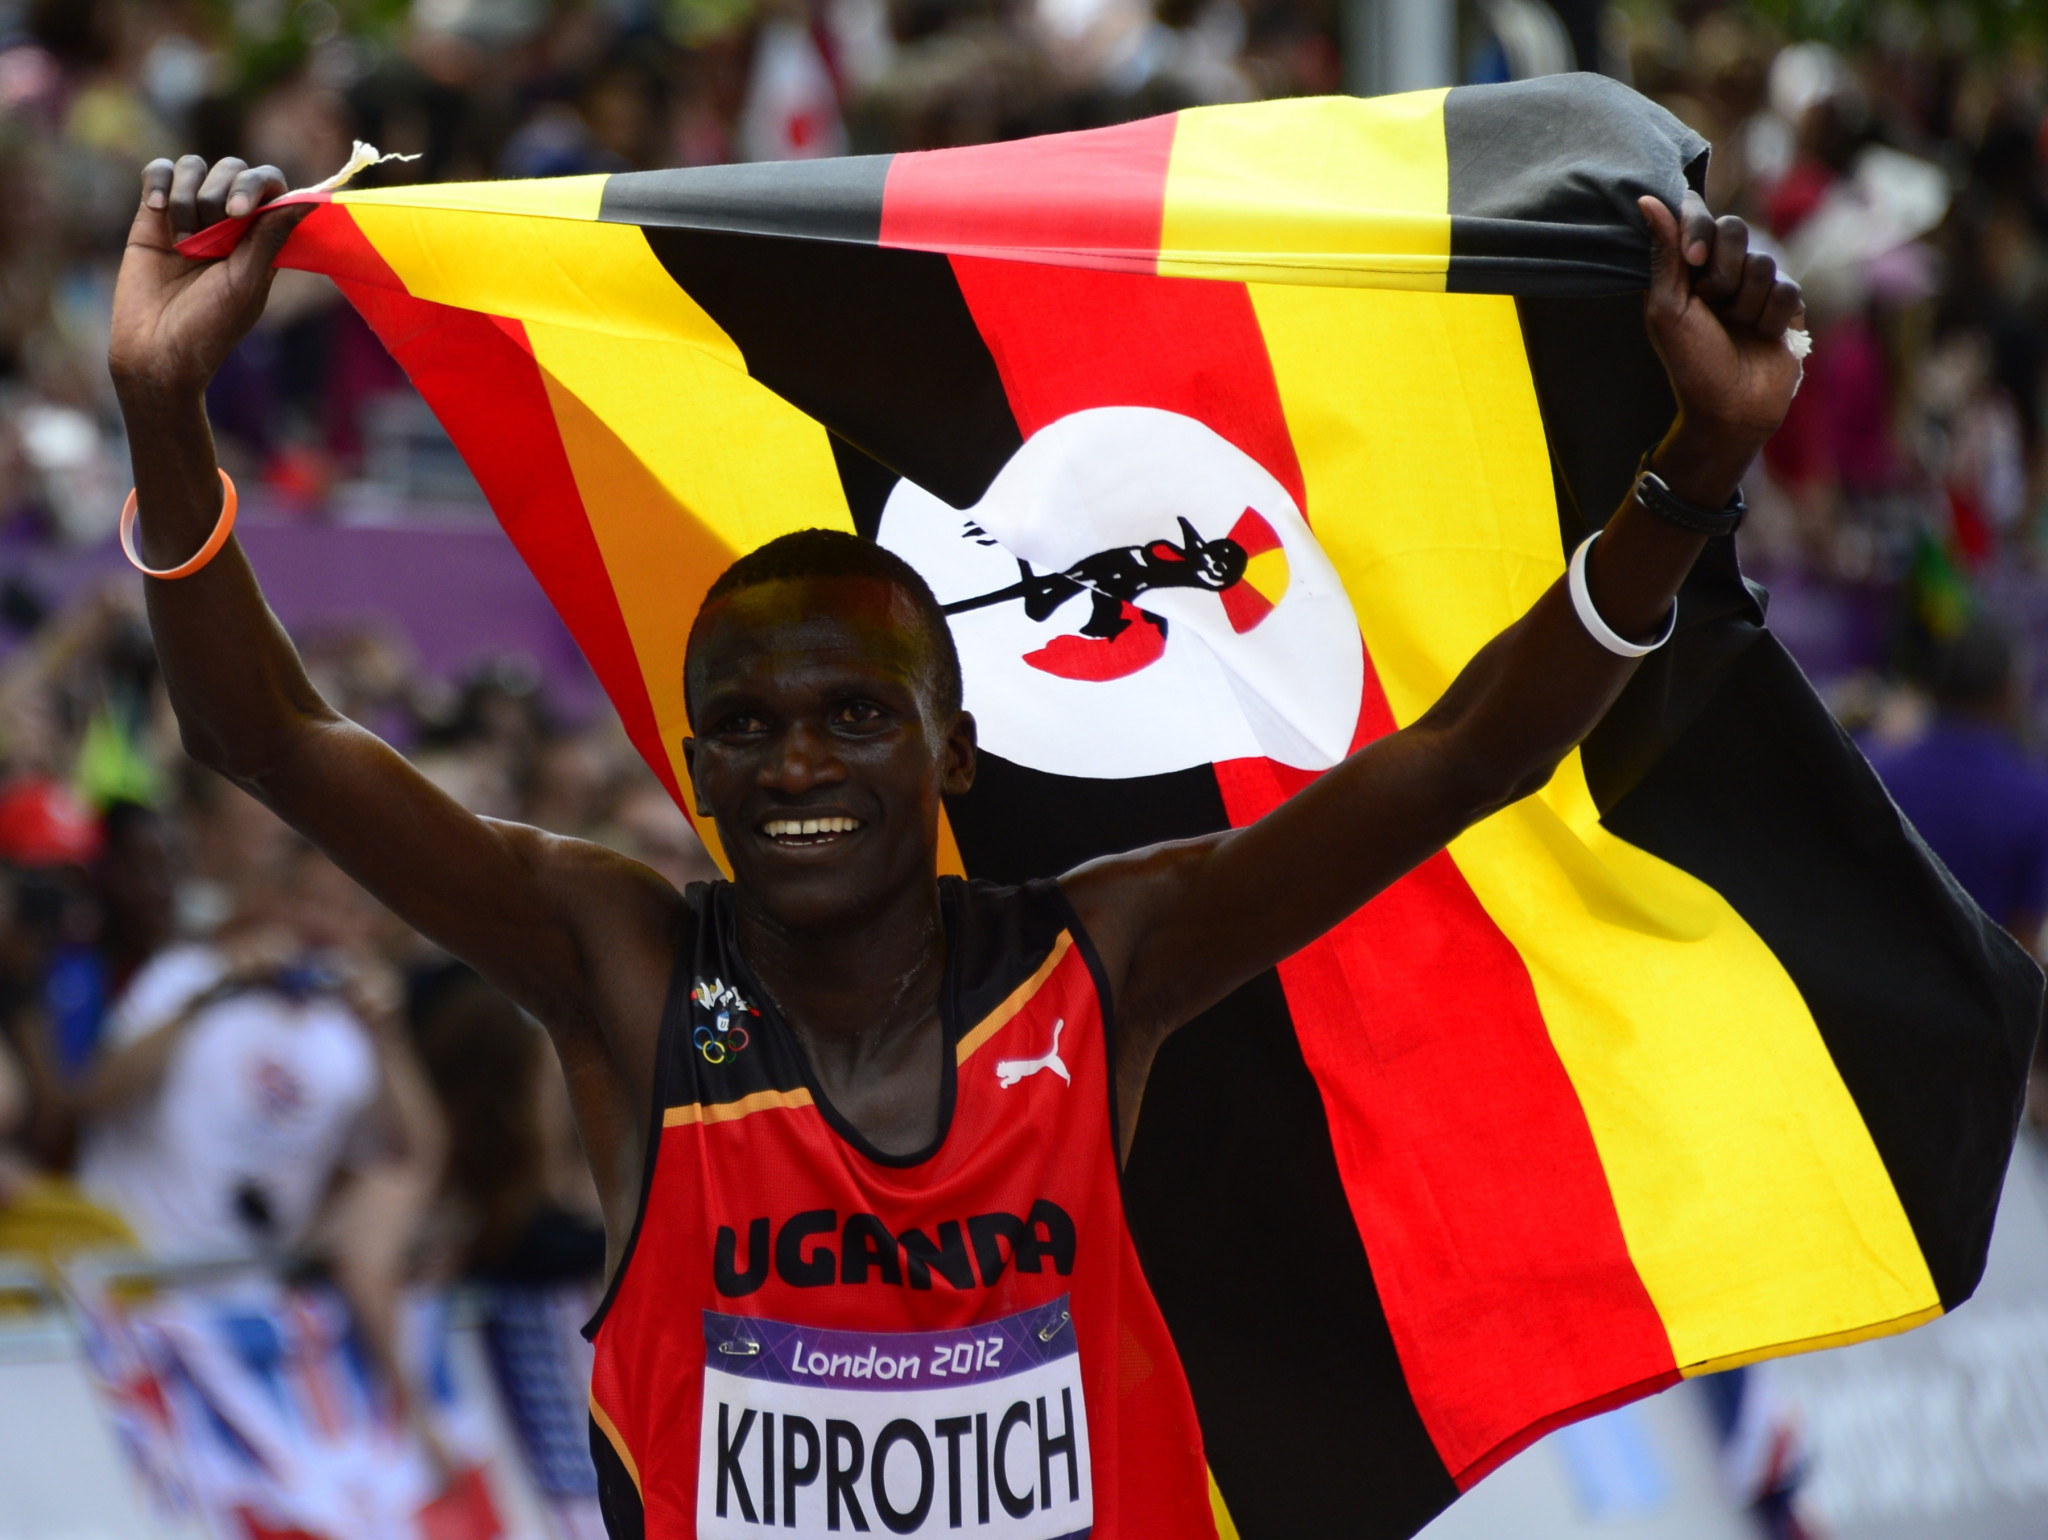 Stephen Kiprotich won Uganda's only Olympic medal of the millenium at London 2012 ©Getty Images